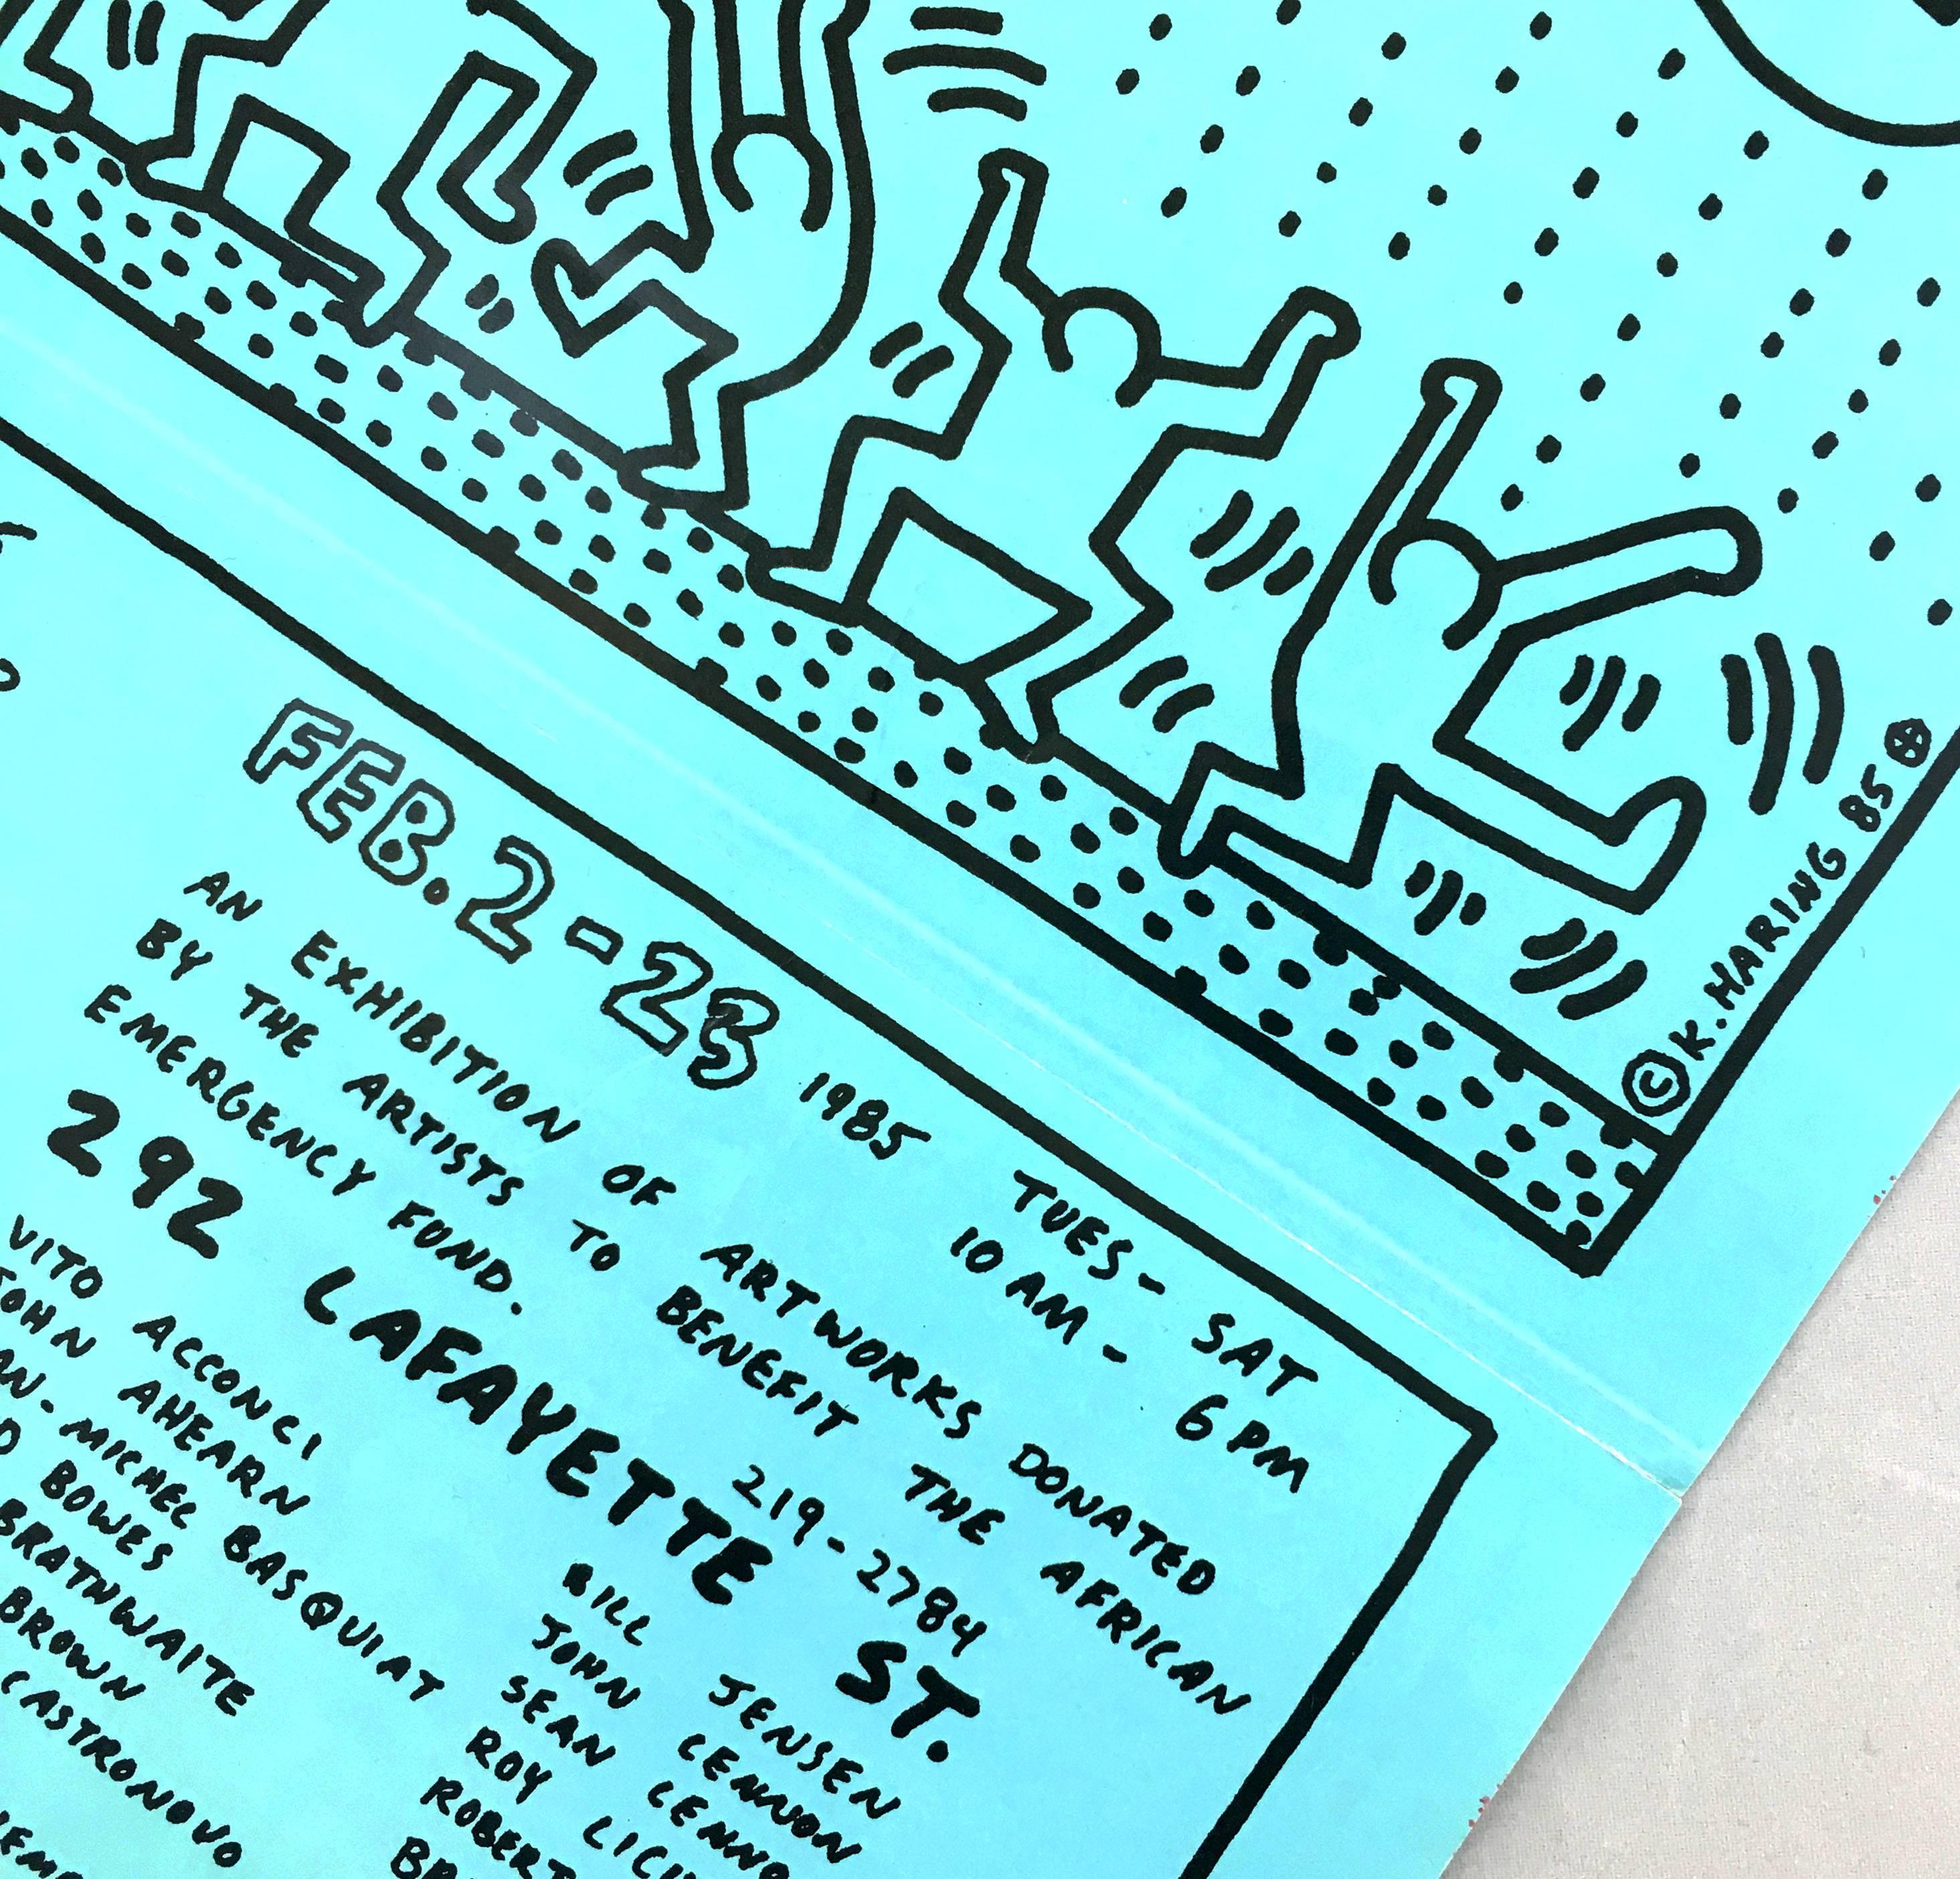 keith haring dancers poster